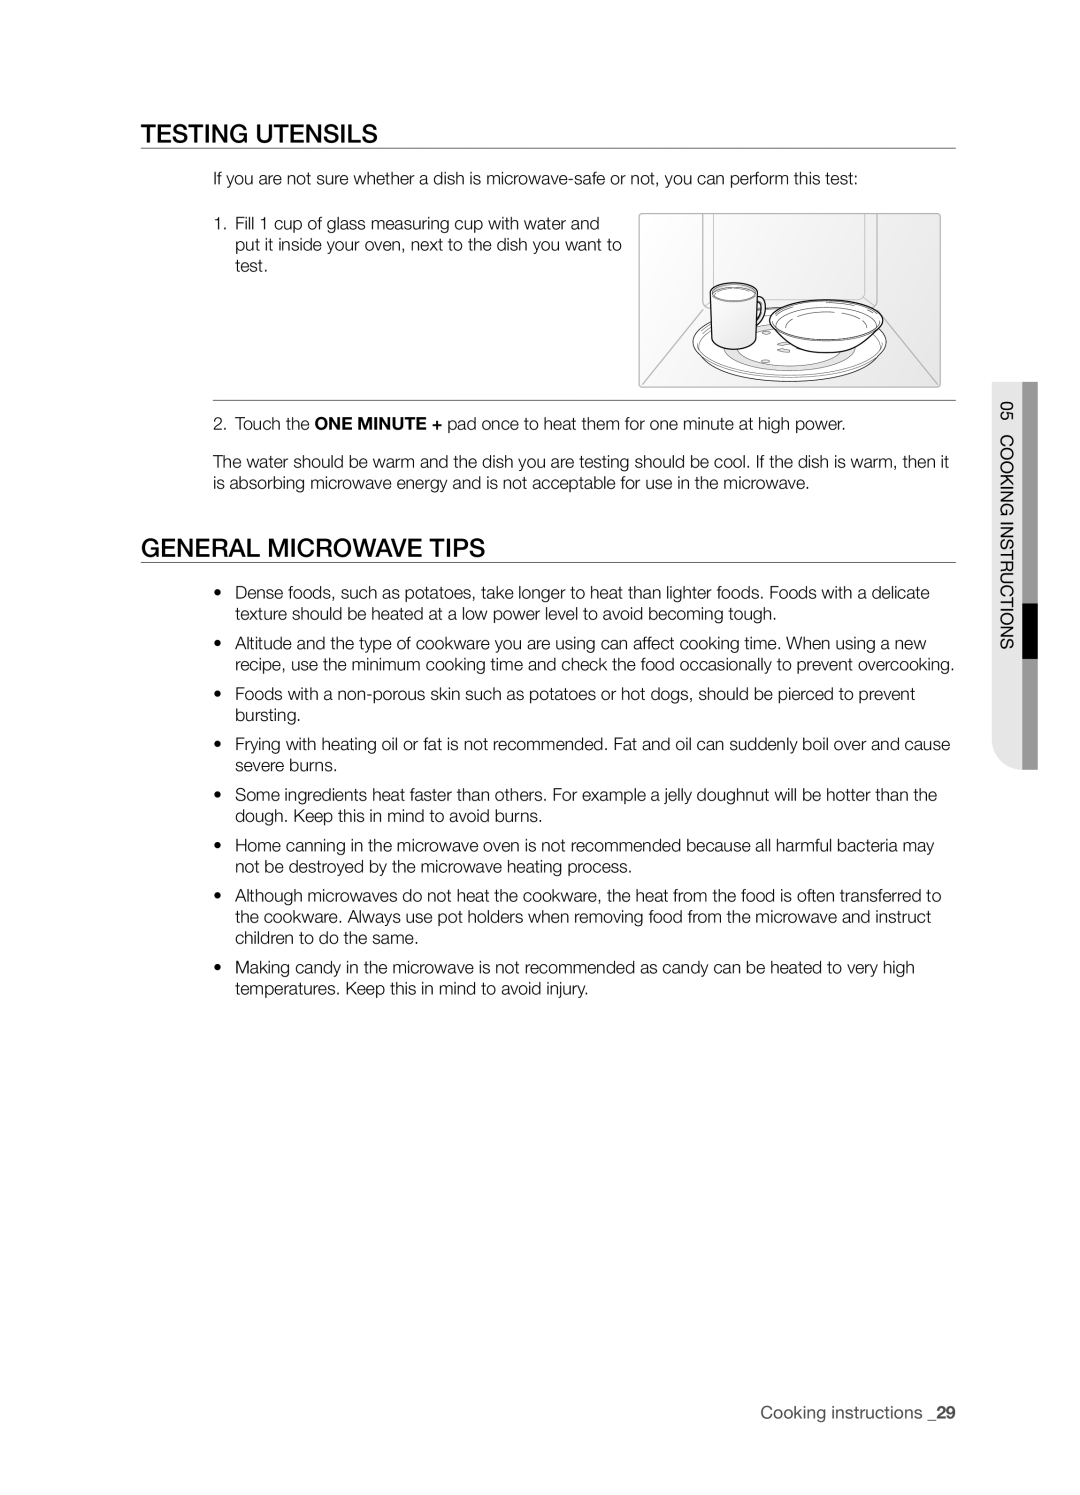 Samsung SMH6165 user manual Testing utensils, General microwave tips, Cooking instructions 